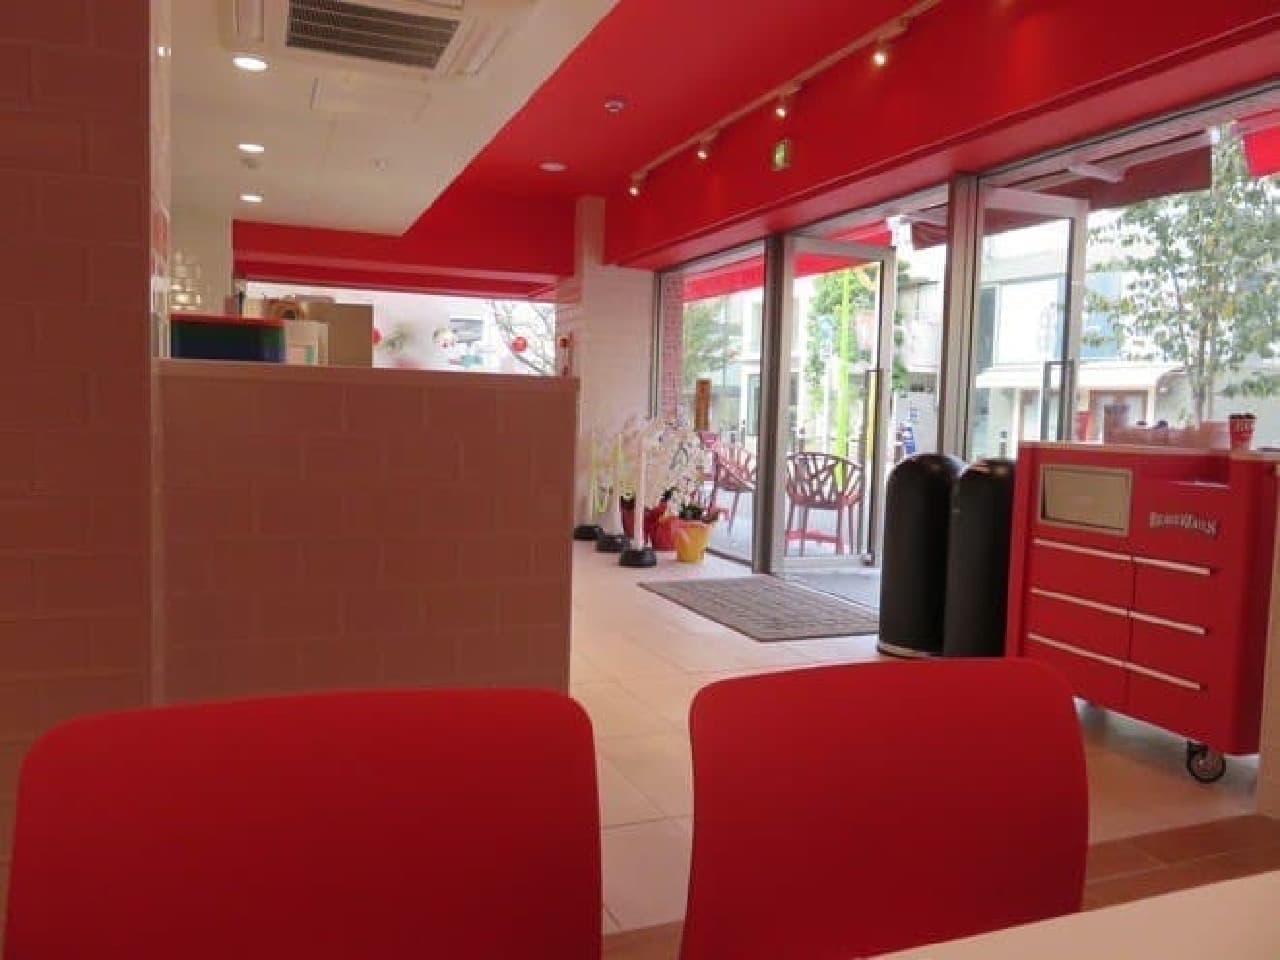 The inside of the store is also red x white